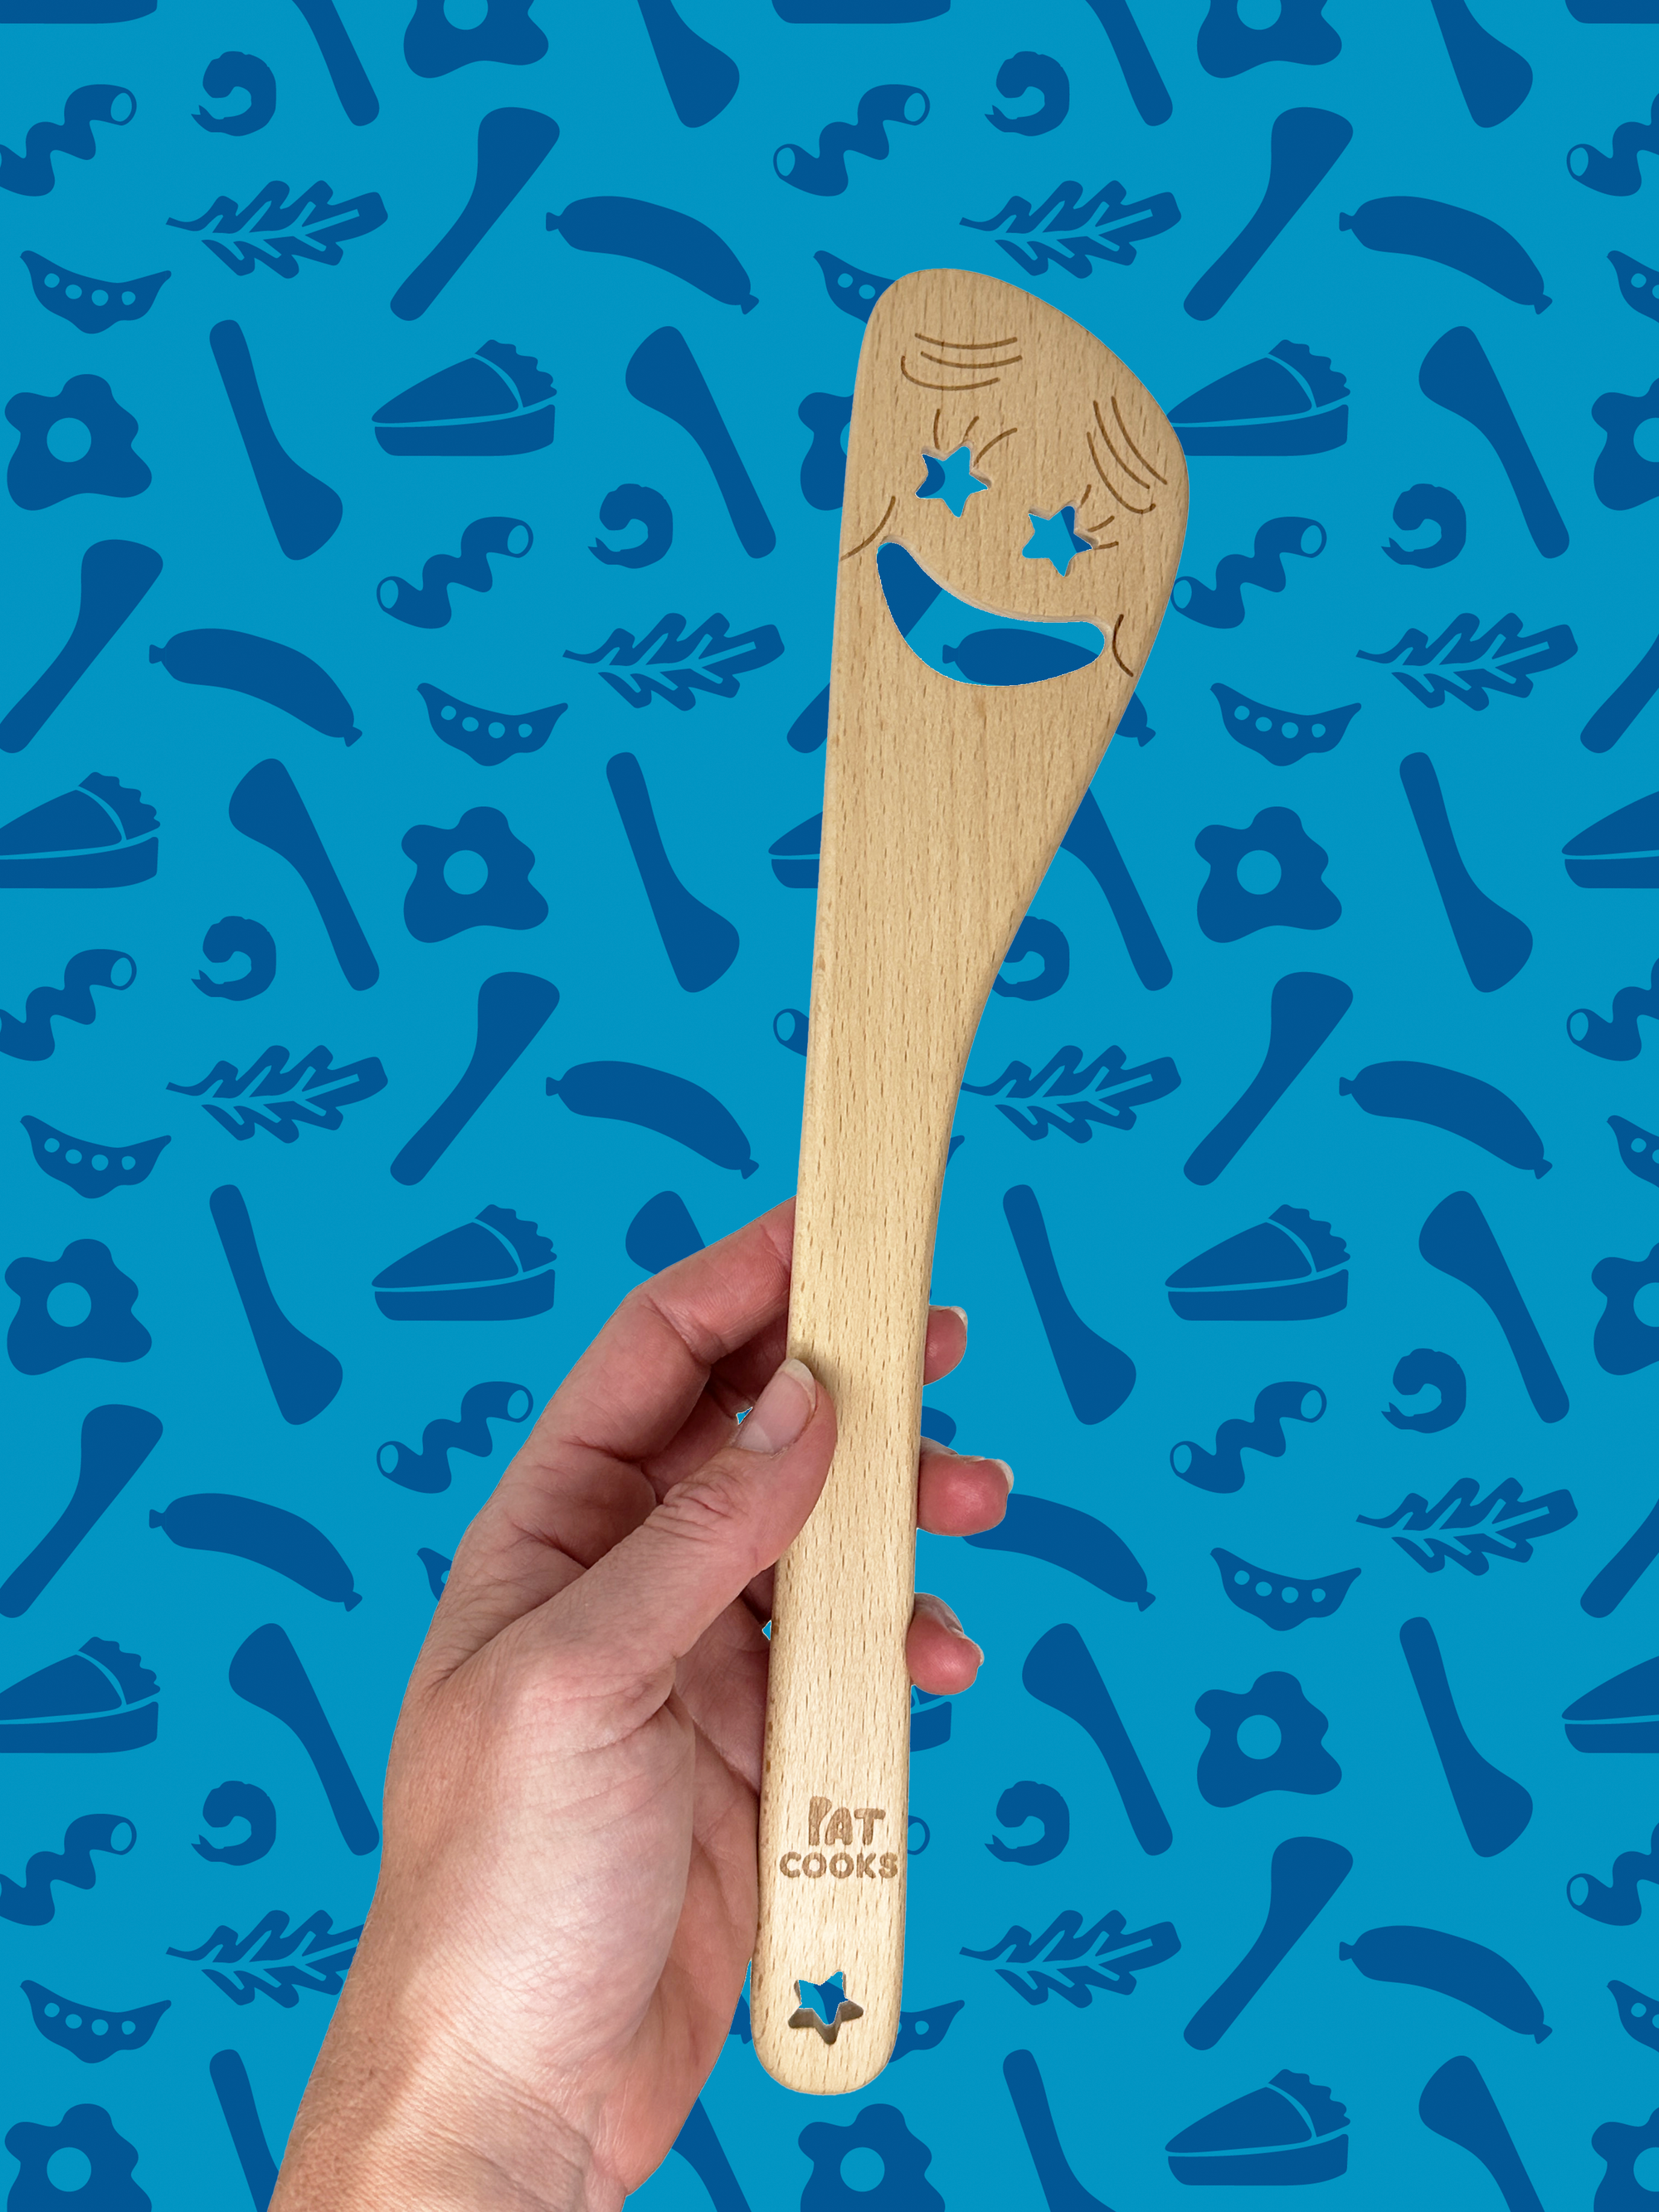 Excited Pat the Spatula